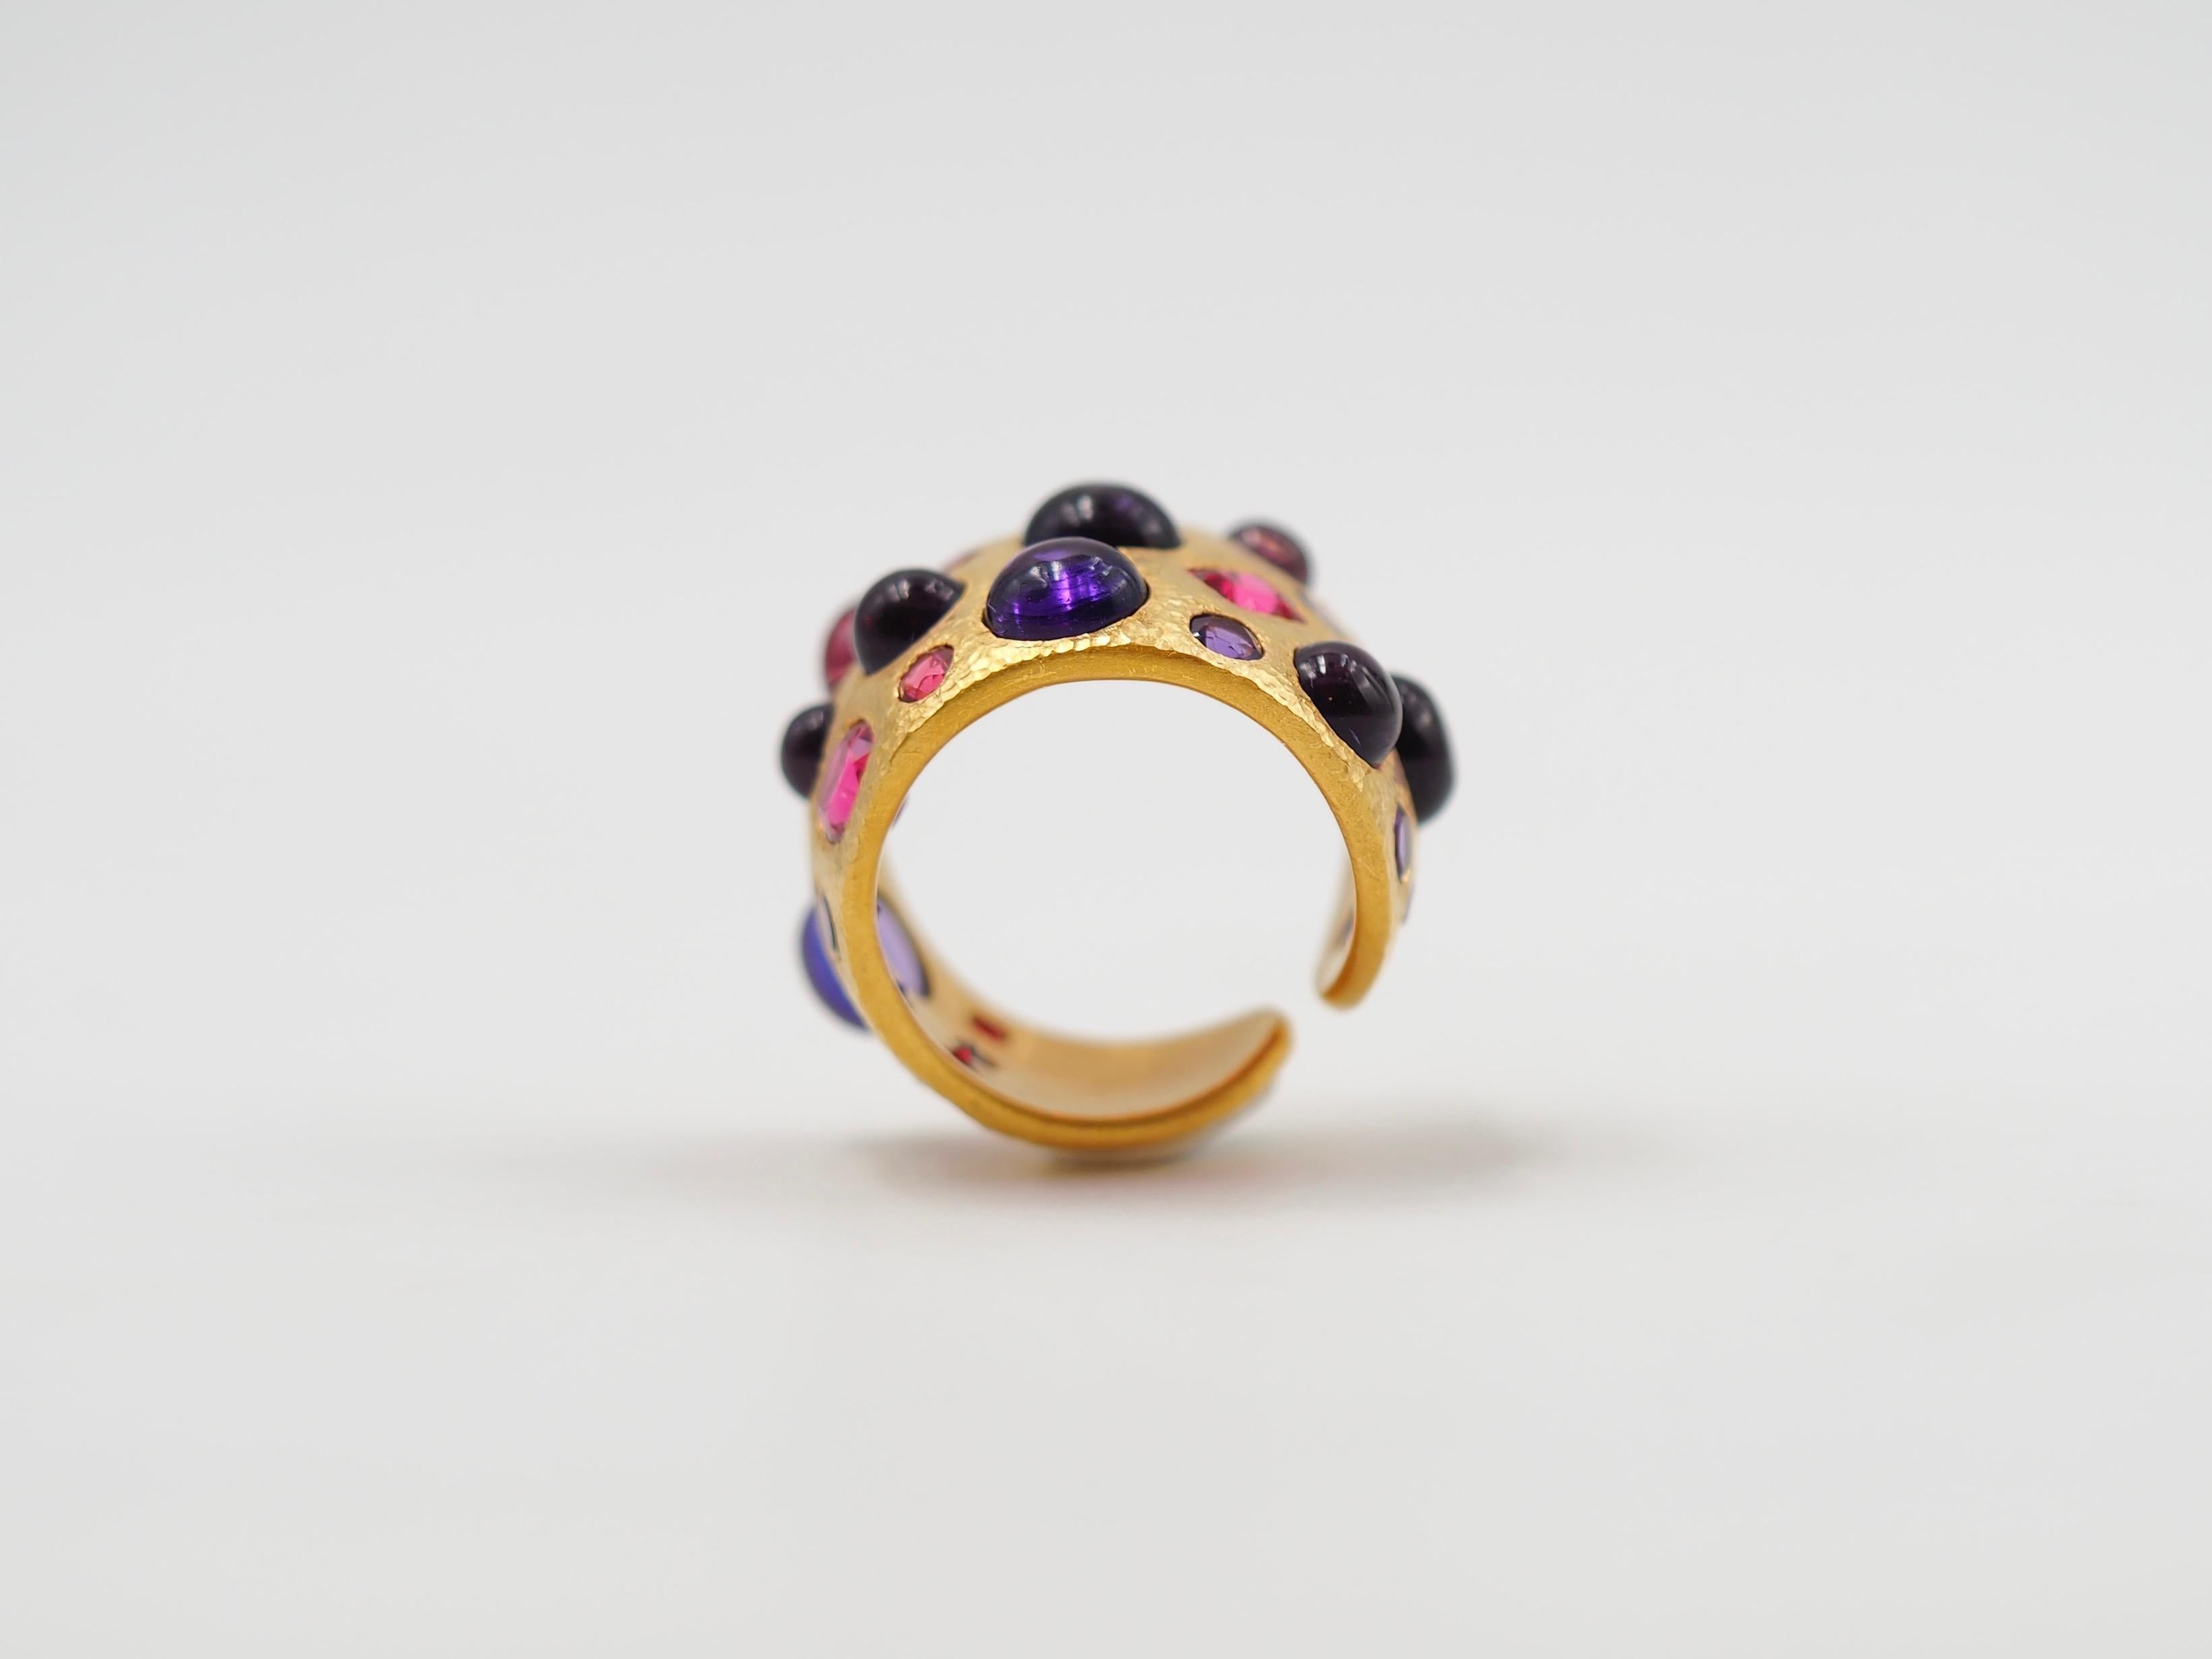 Scrives Spinel Amethyst Cushion Cabochons 22 Karat Gold Hammered Handmade Ring In New Condition For Sale In Paris, Paris